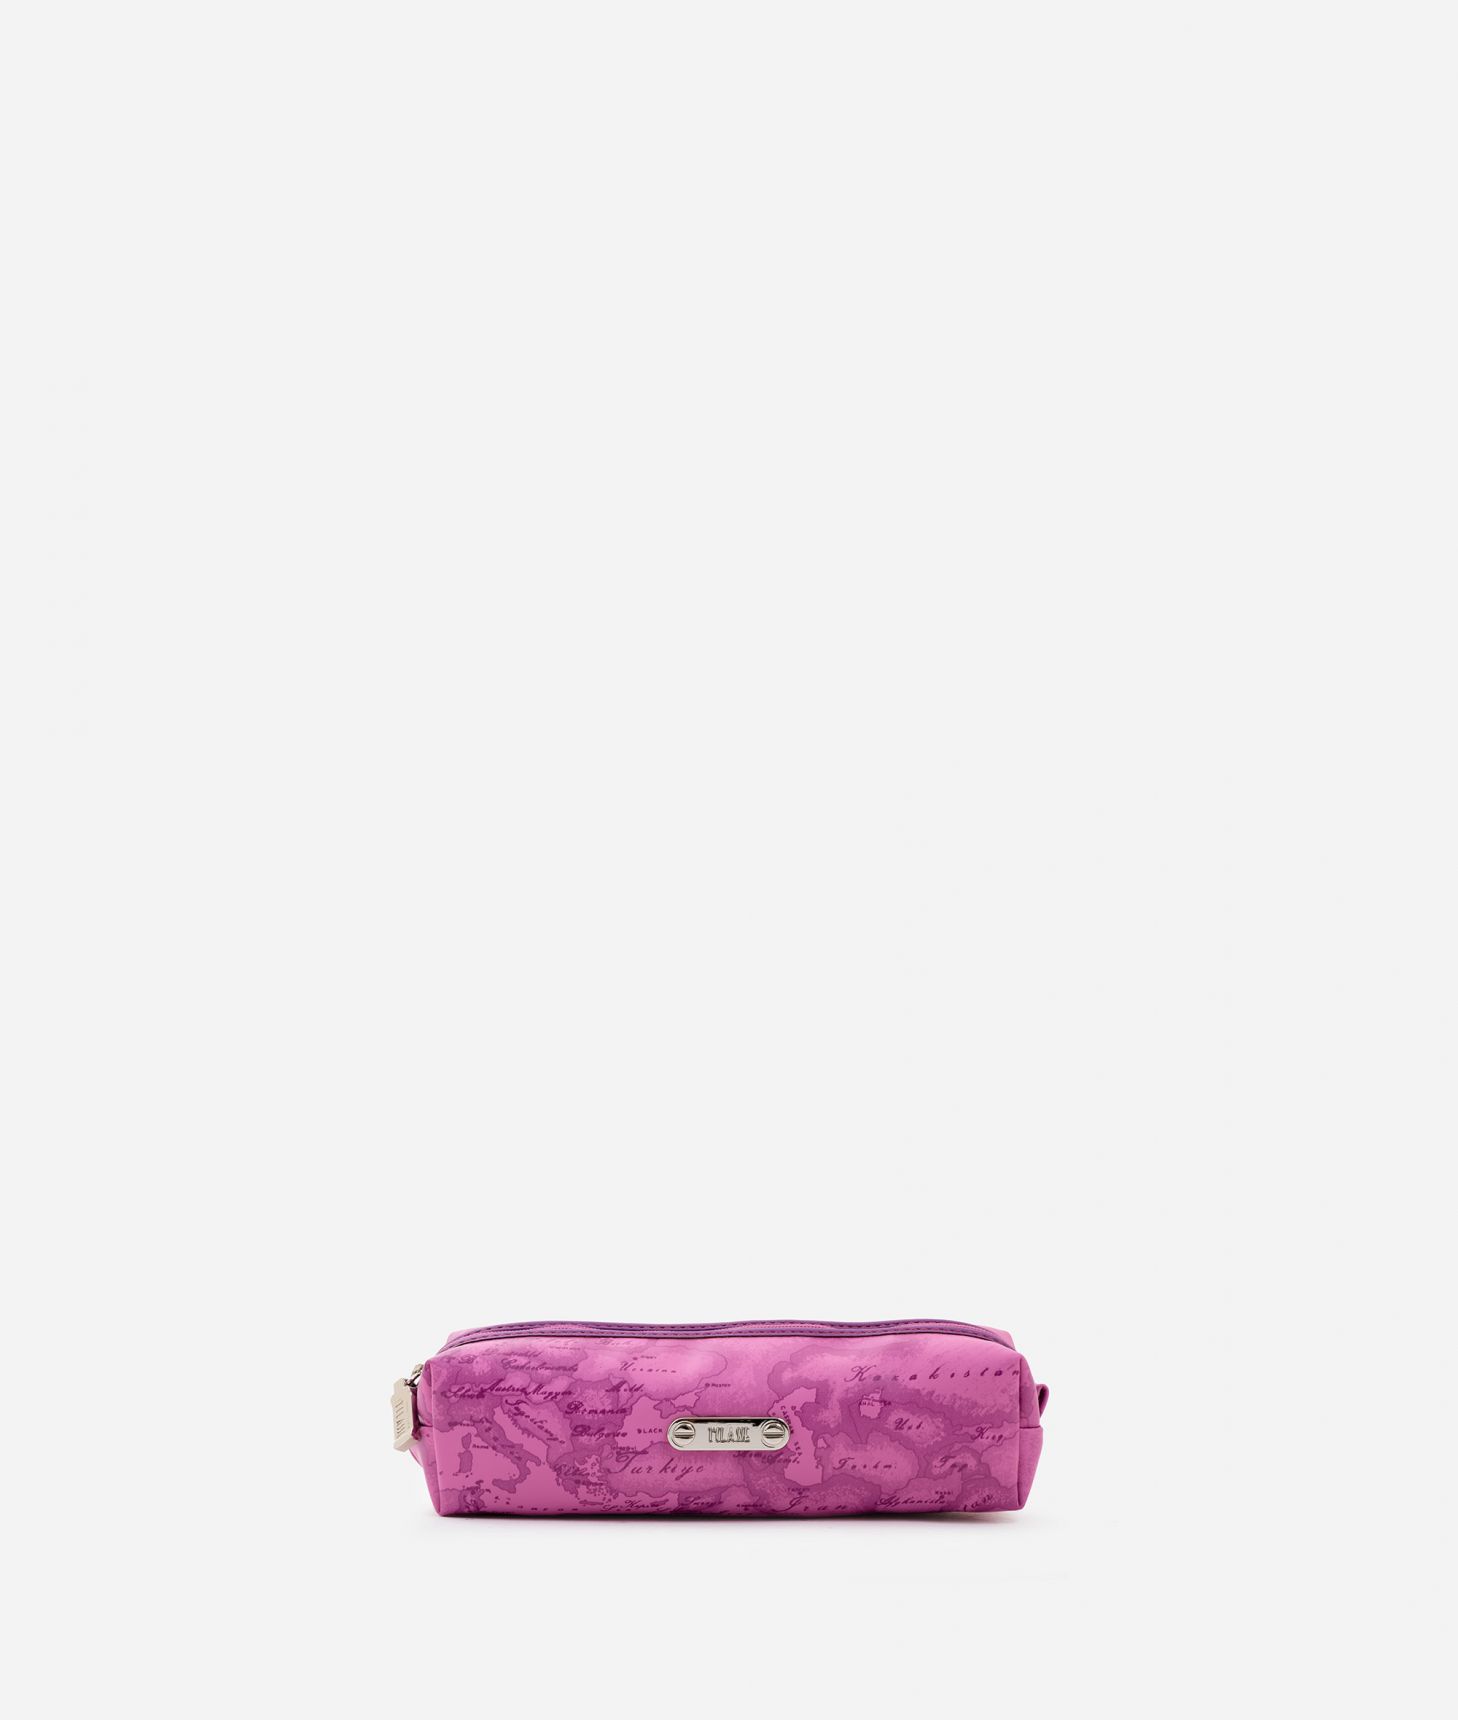 Travel pouch in mauve rubberized fabric,front